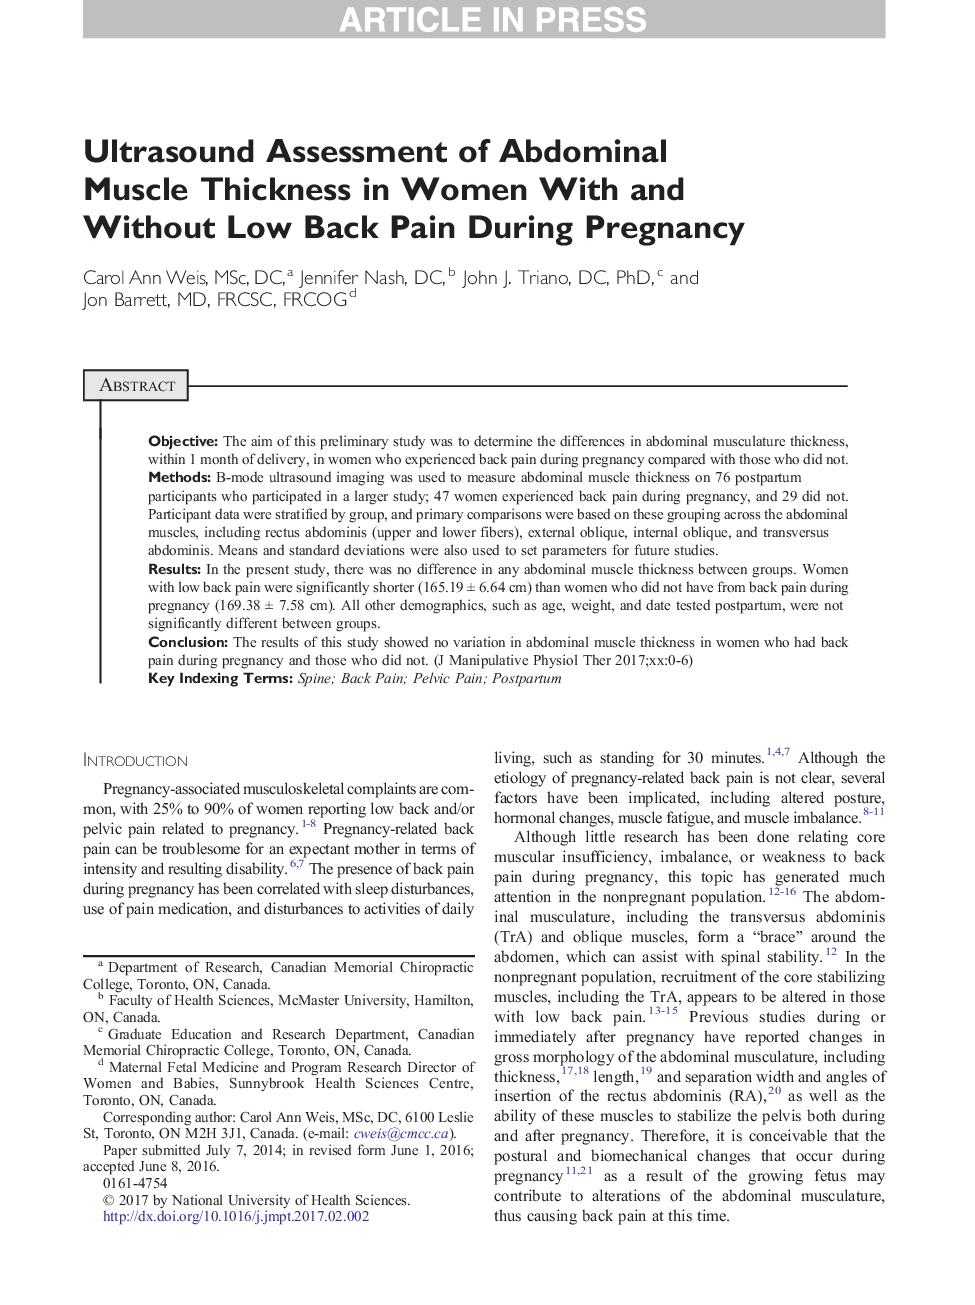 Ultrasound Assessment of Abdominal Muscle Thickness in Women With and Without Low Back Pain During Pregnancy